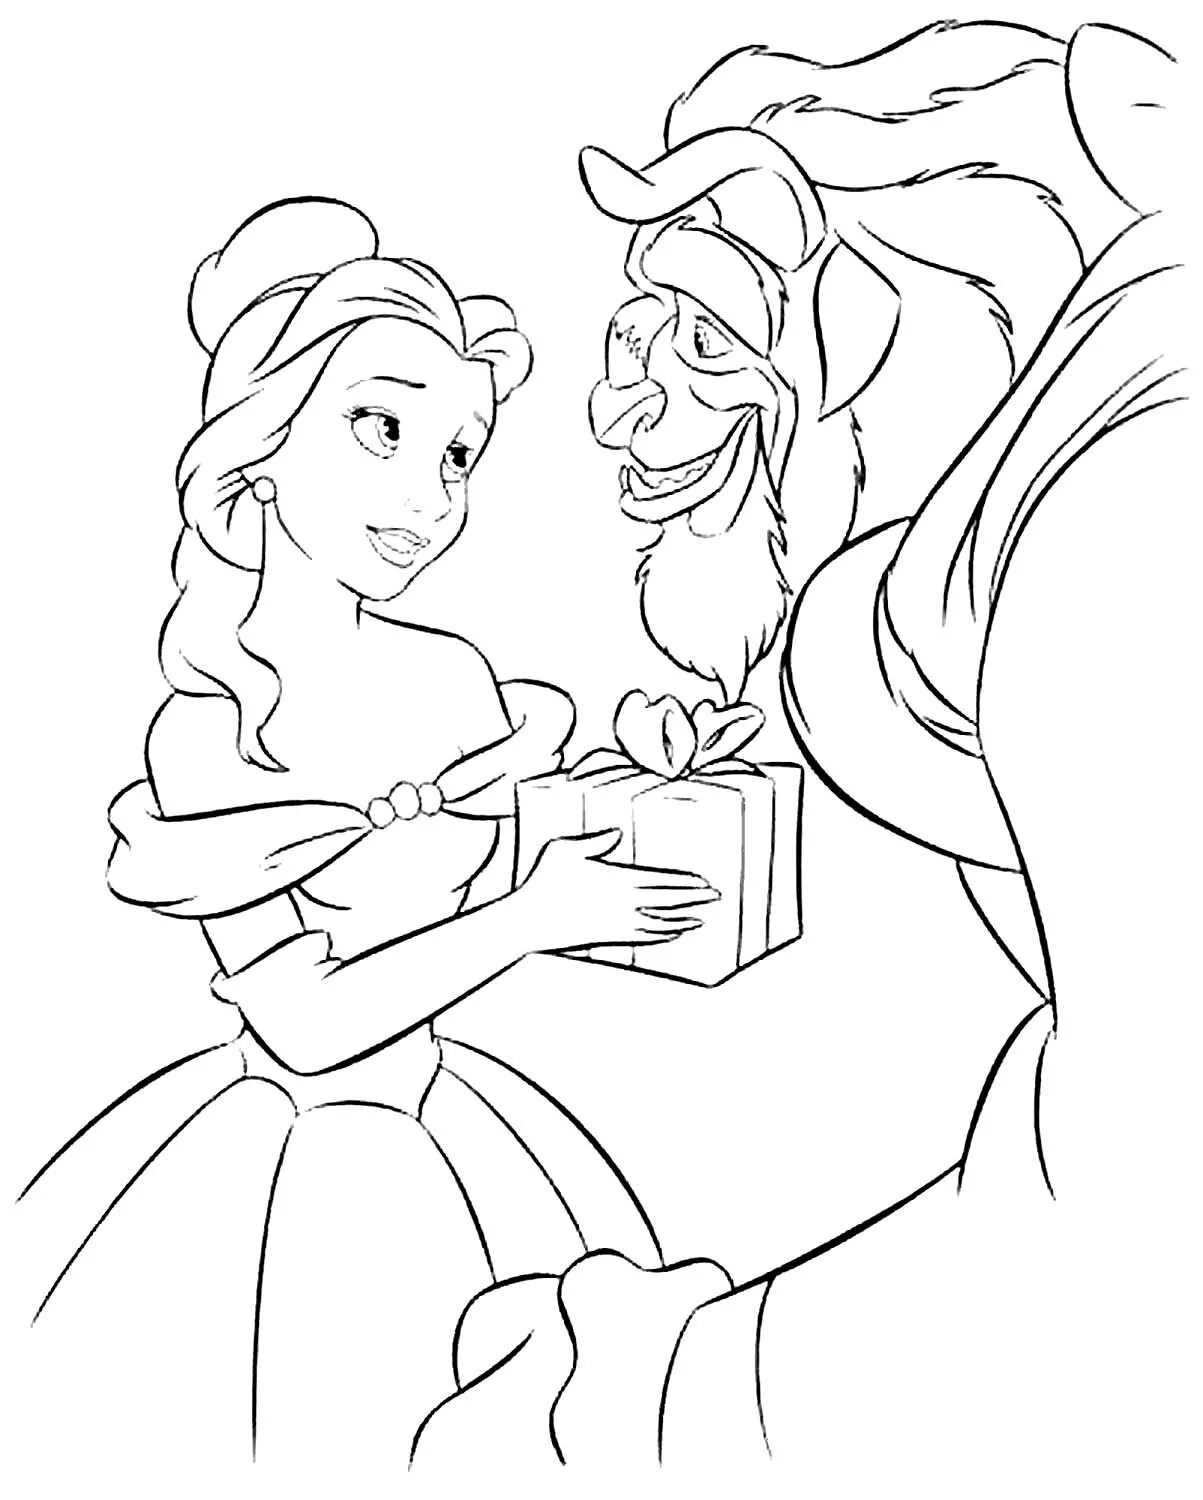 Beauty and the beast for kids #1